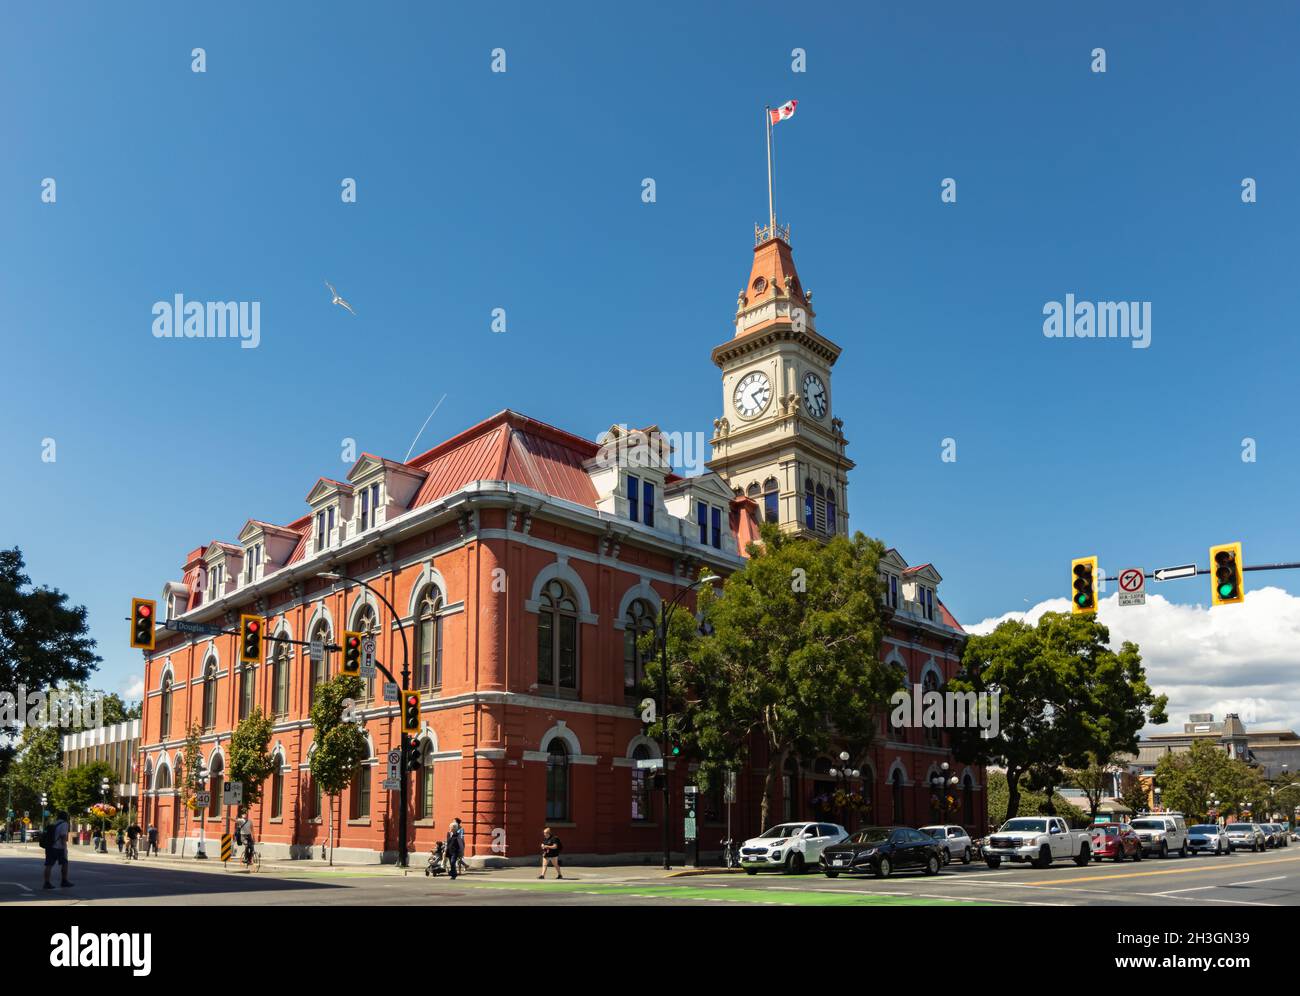 Victoria City Hall facade in capital of British Columbia, Canada. City Hall is a landmark in Victoria's Old Town District. Street photo, travel photo, Stock Photo